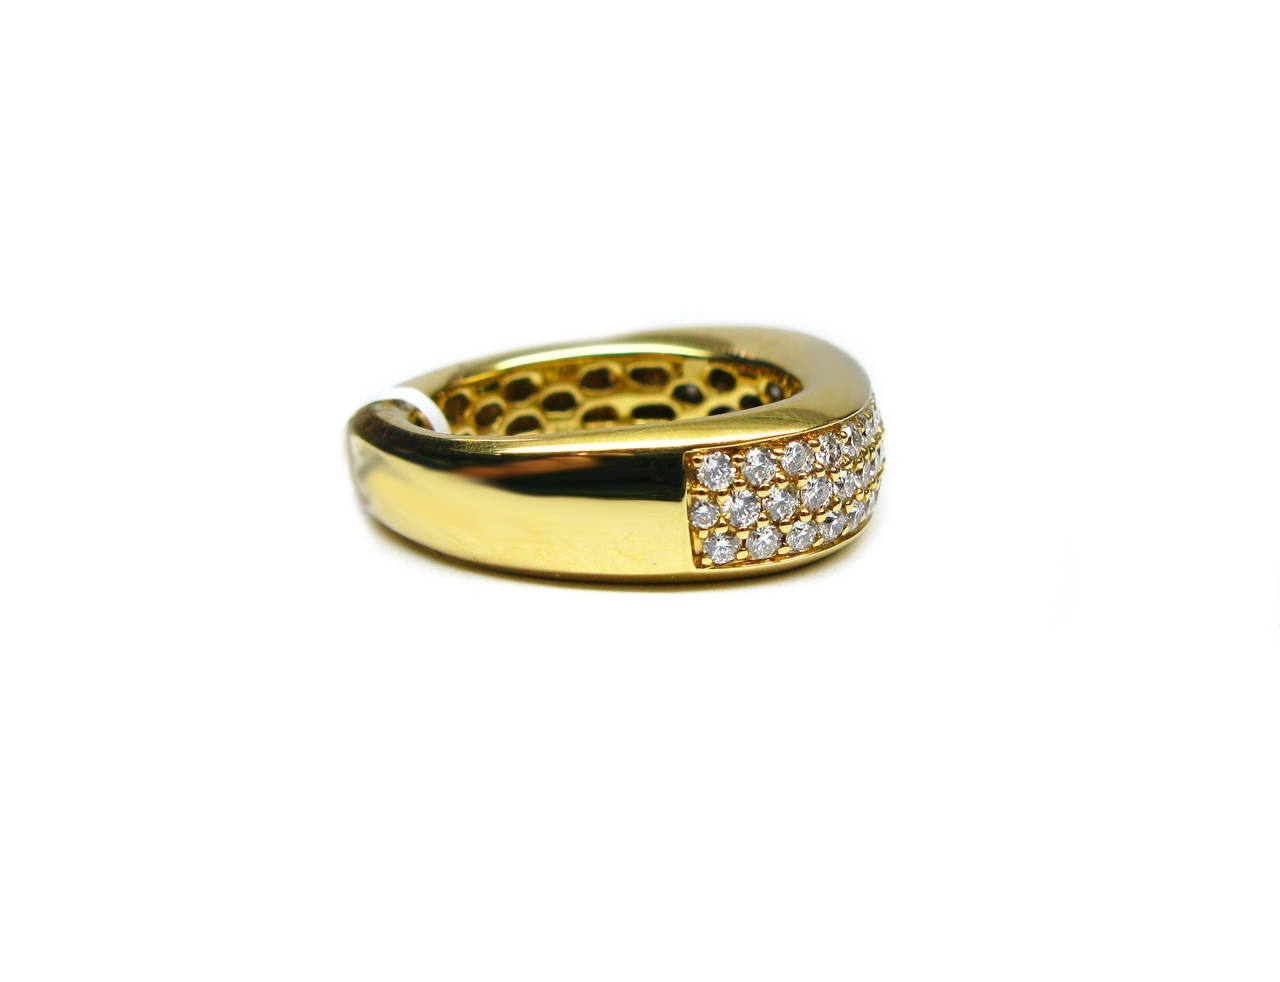 This unique band is part of the Kurt Wayne Collection. It is an 18kt highly polished yellow gold band featuring three sparkling rows of pave set round brilliant diamonds weighing 0.84ctw. Wear it as a wedding band or fashion band. Either way it